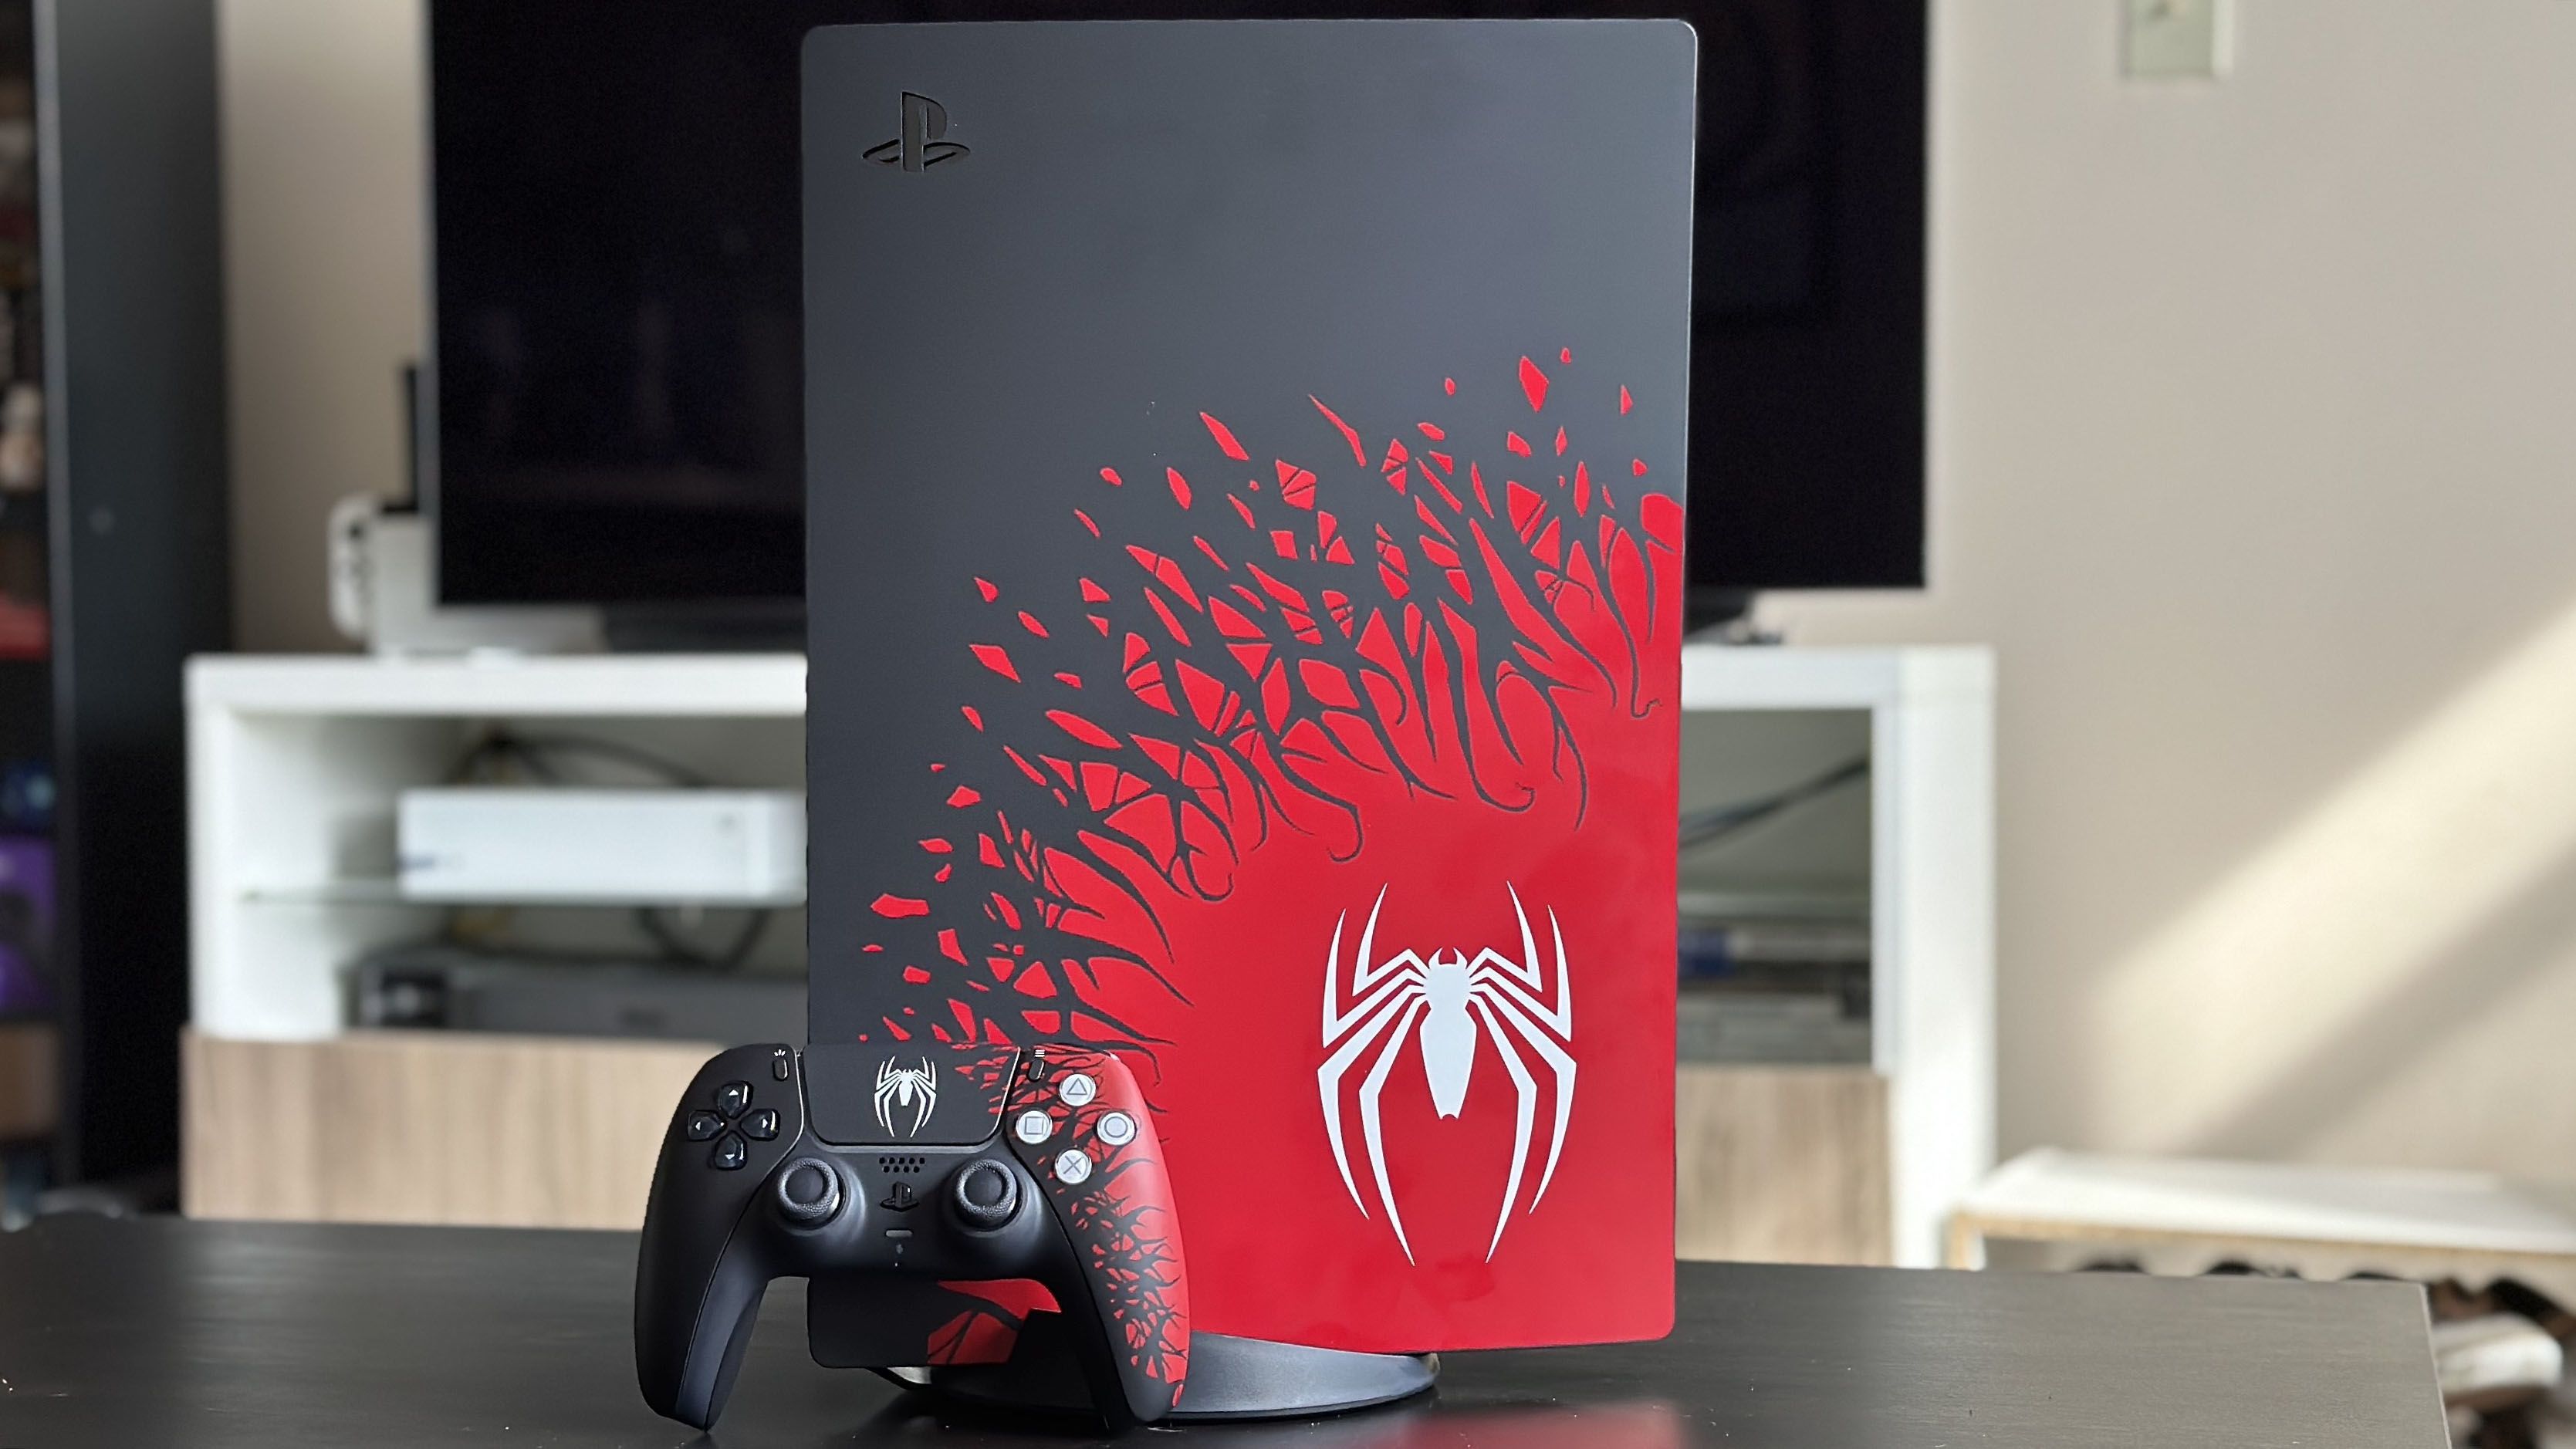 Spider-Man 2 video game ps5 release date: Spider-Man 2 PS5 Bundle